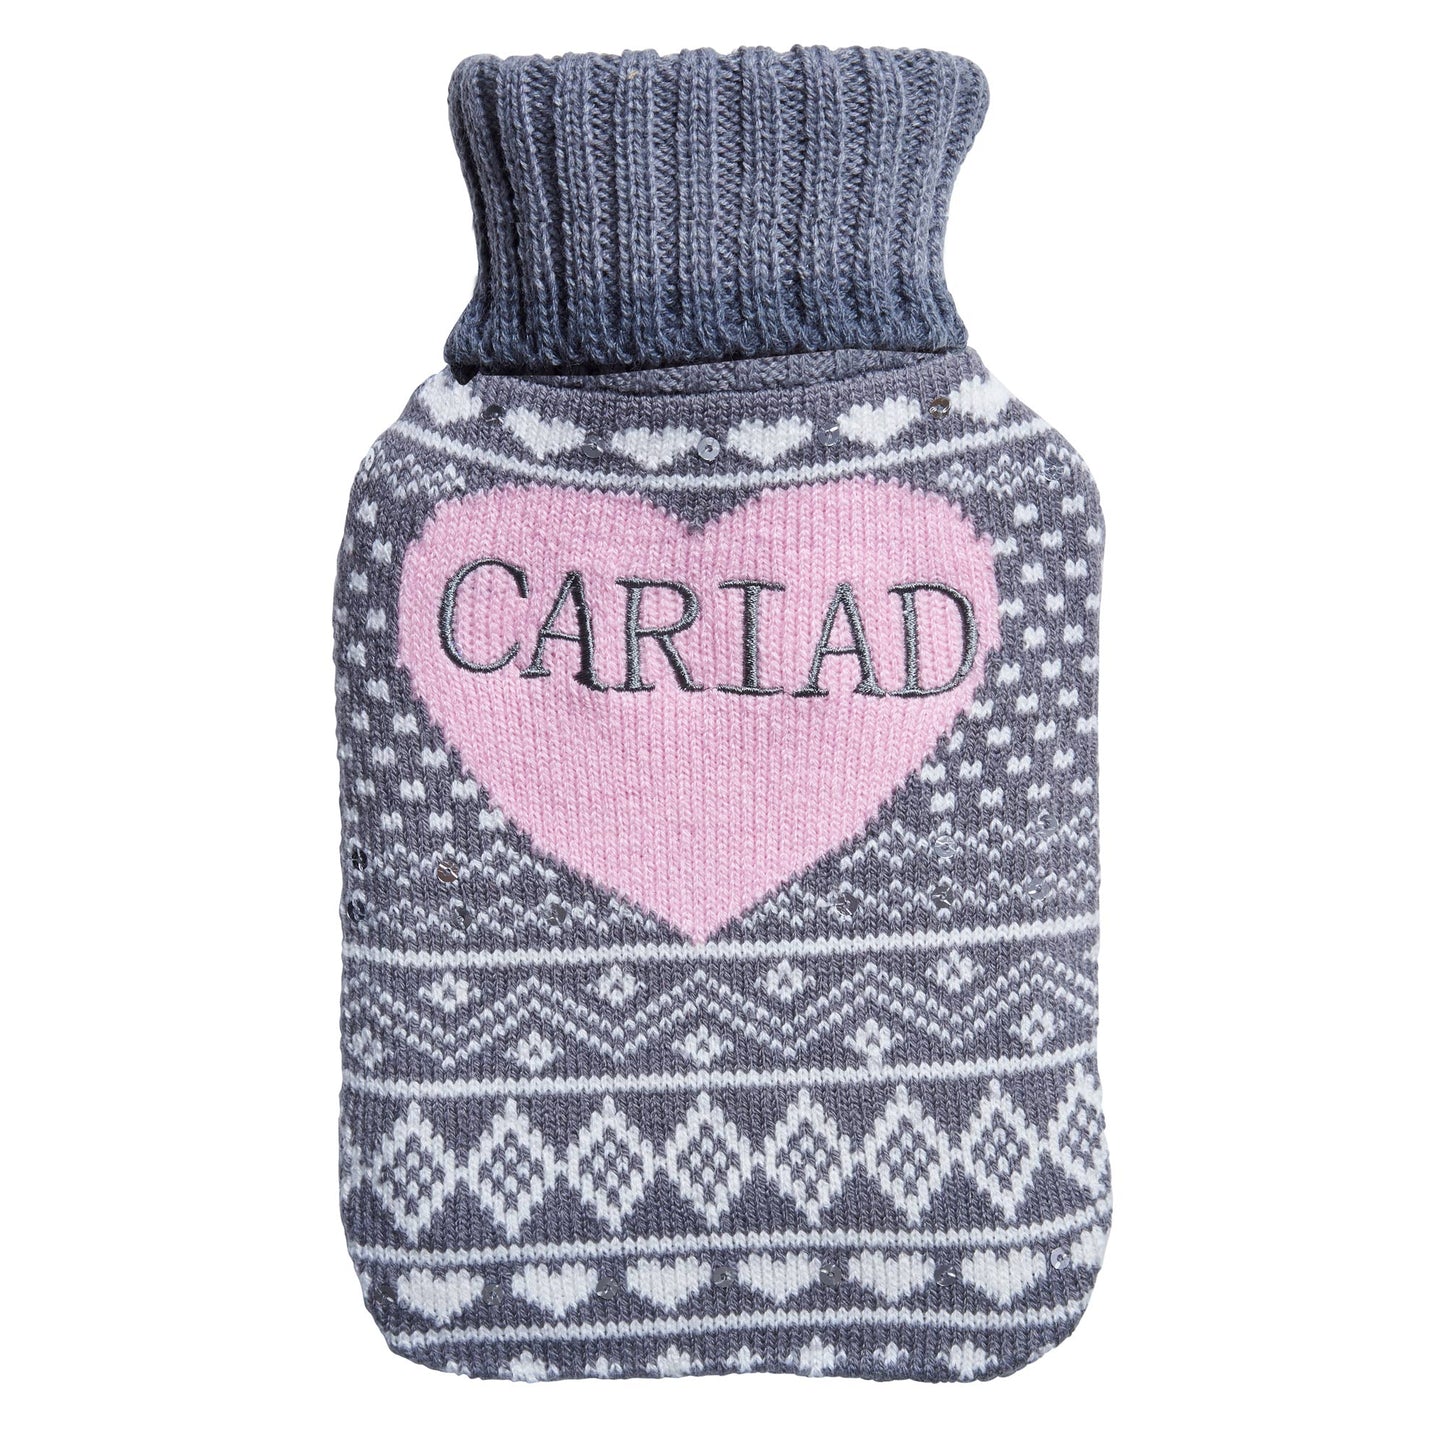 Hot Water Bottle - Love - Cariad